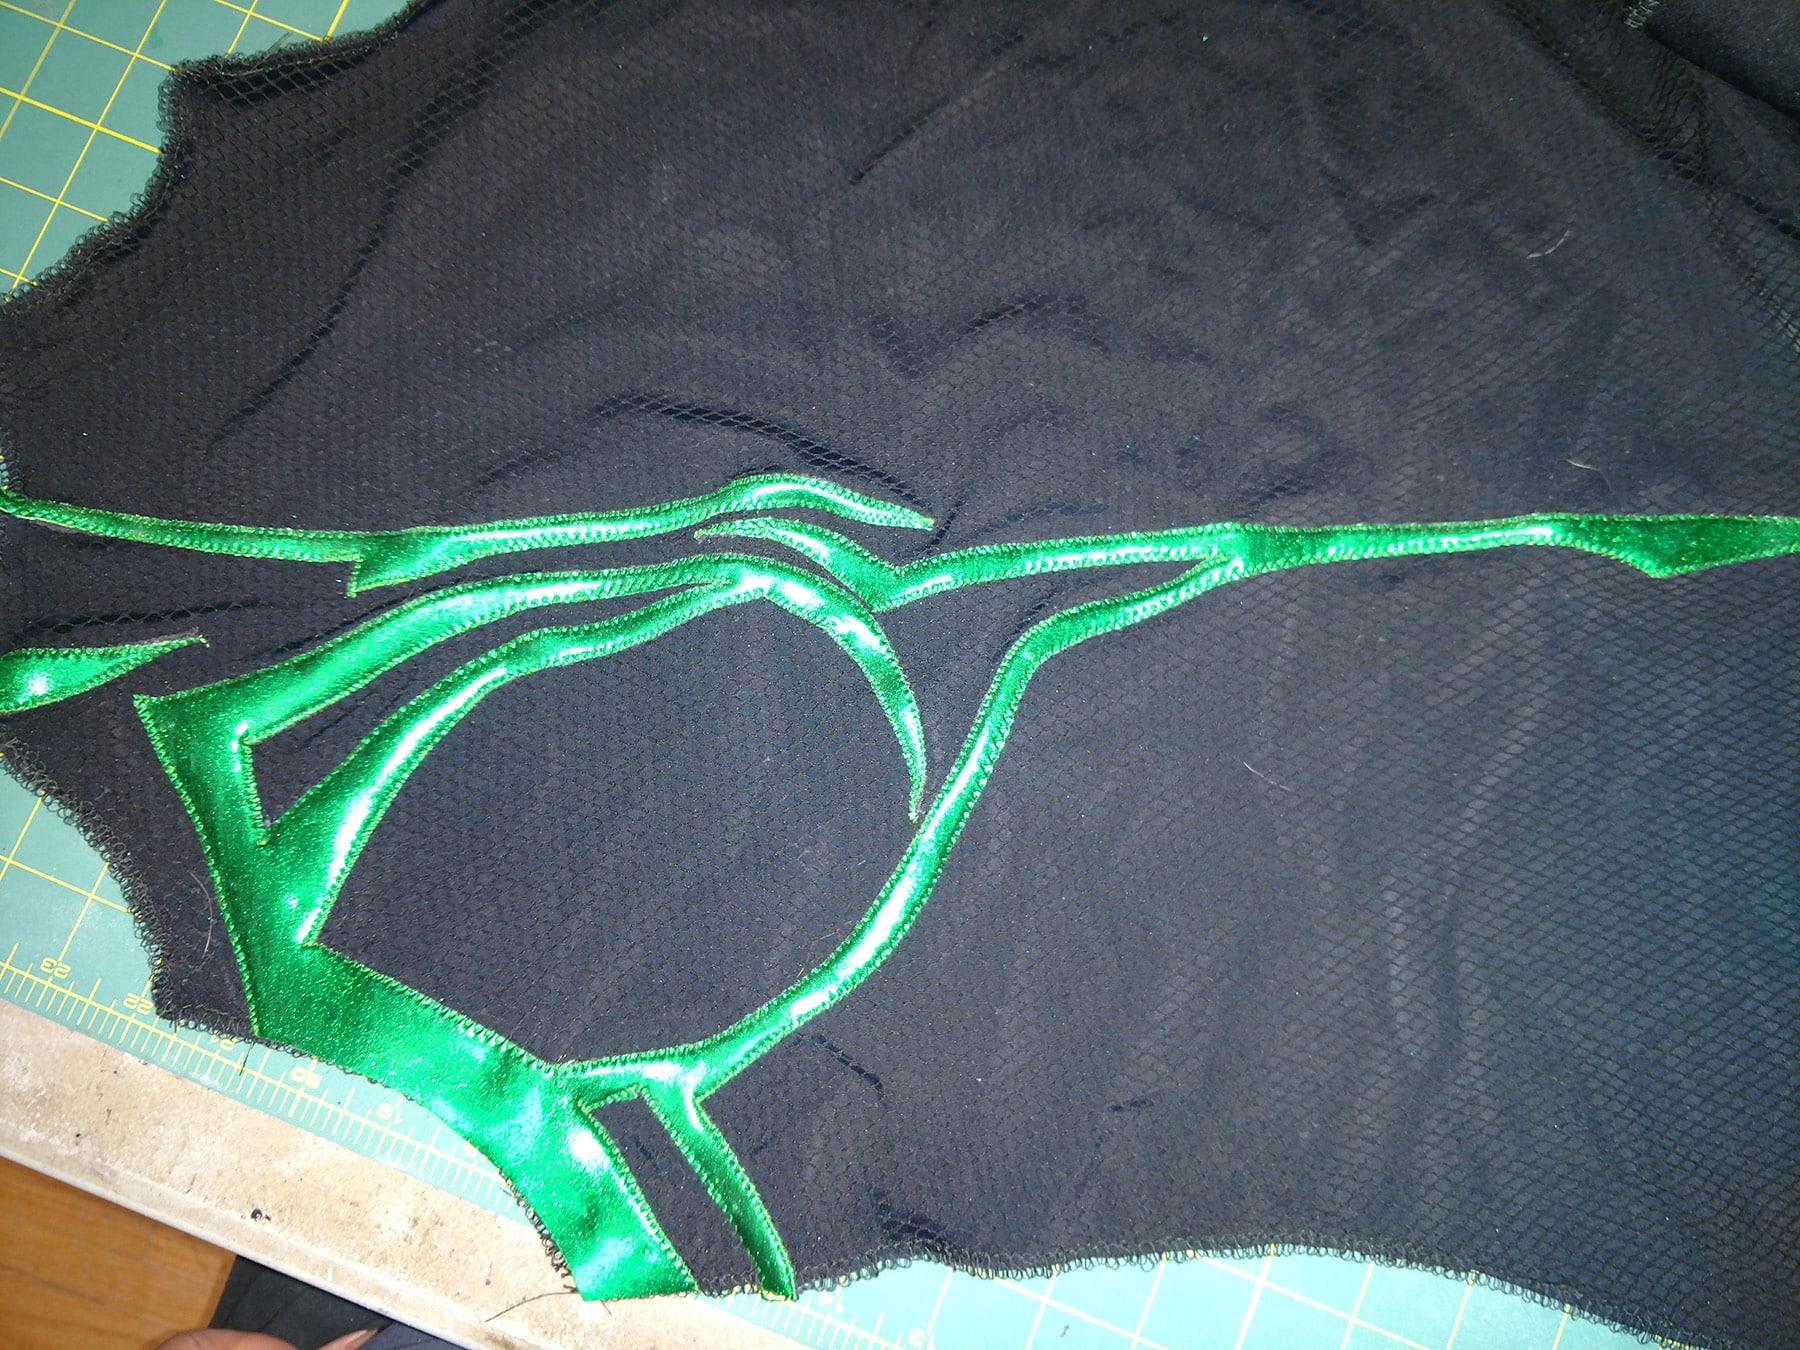 An intricate cutting of shiny green fabric is stitched in place on a textured bodice piece of black spandex.